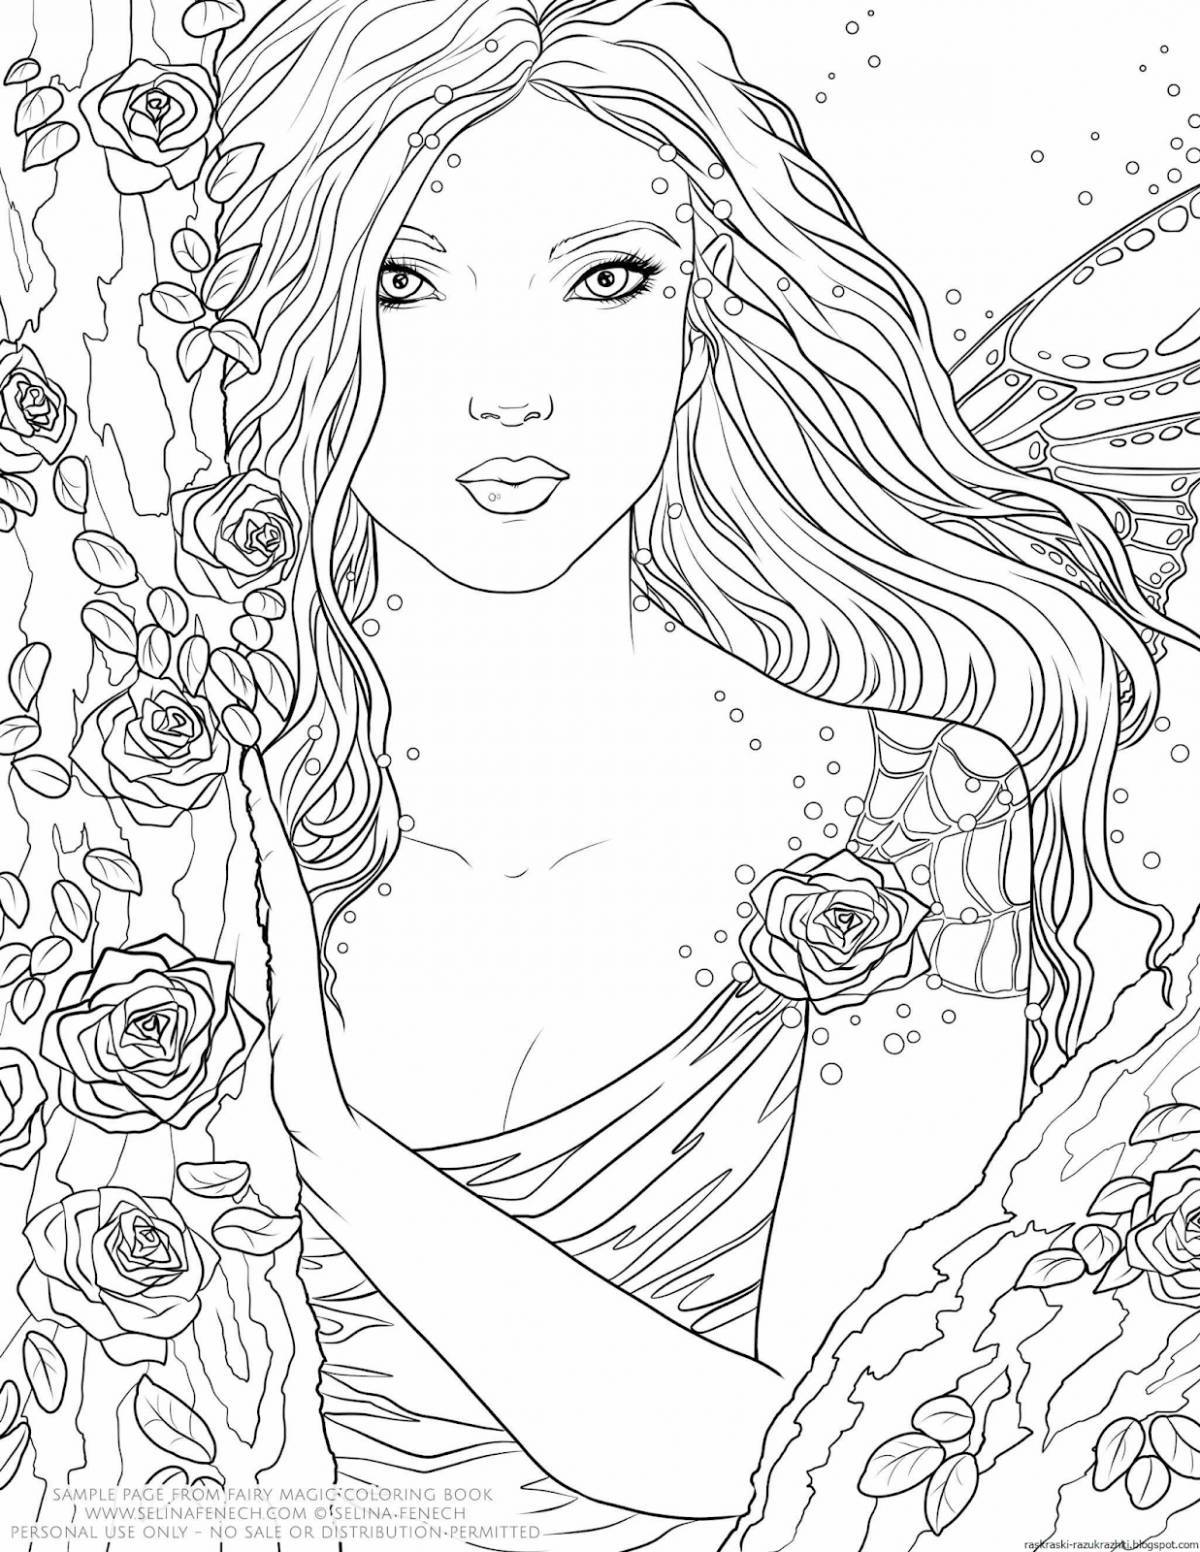 Exquisite 18 year old coloring book for girls